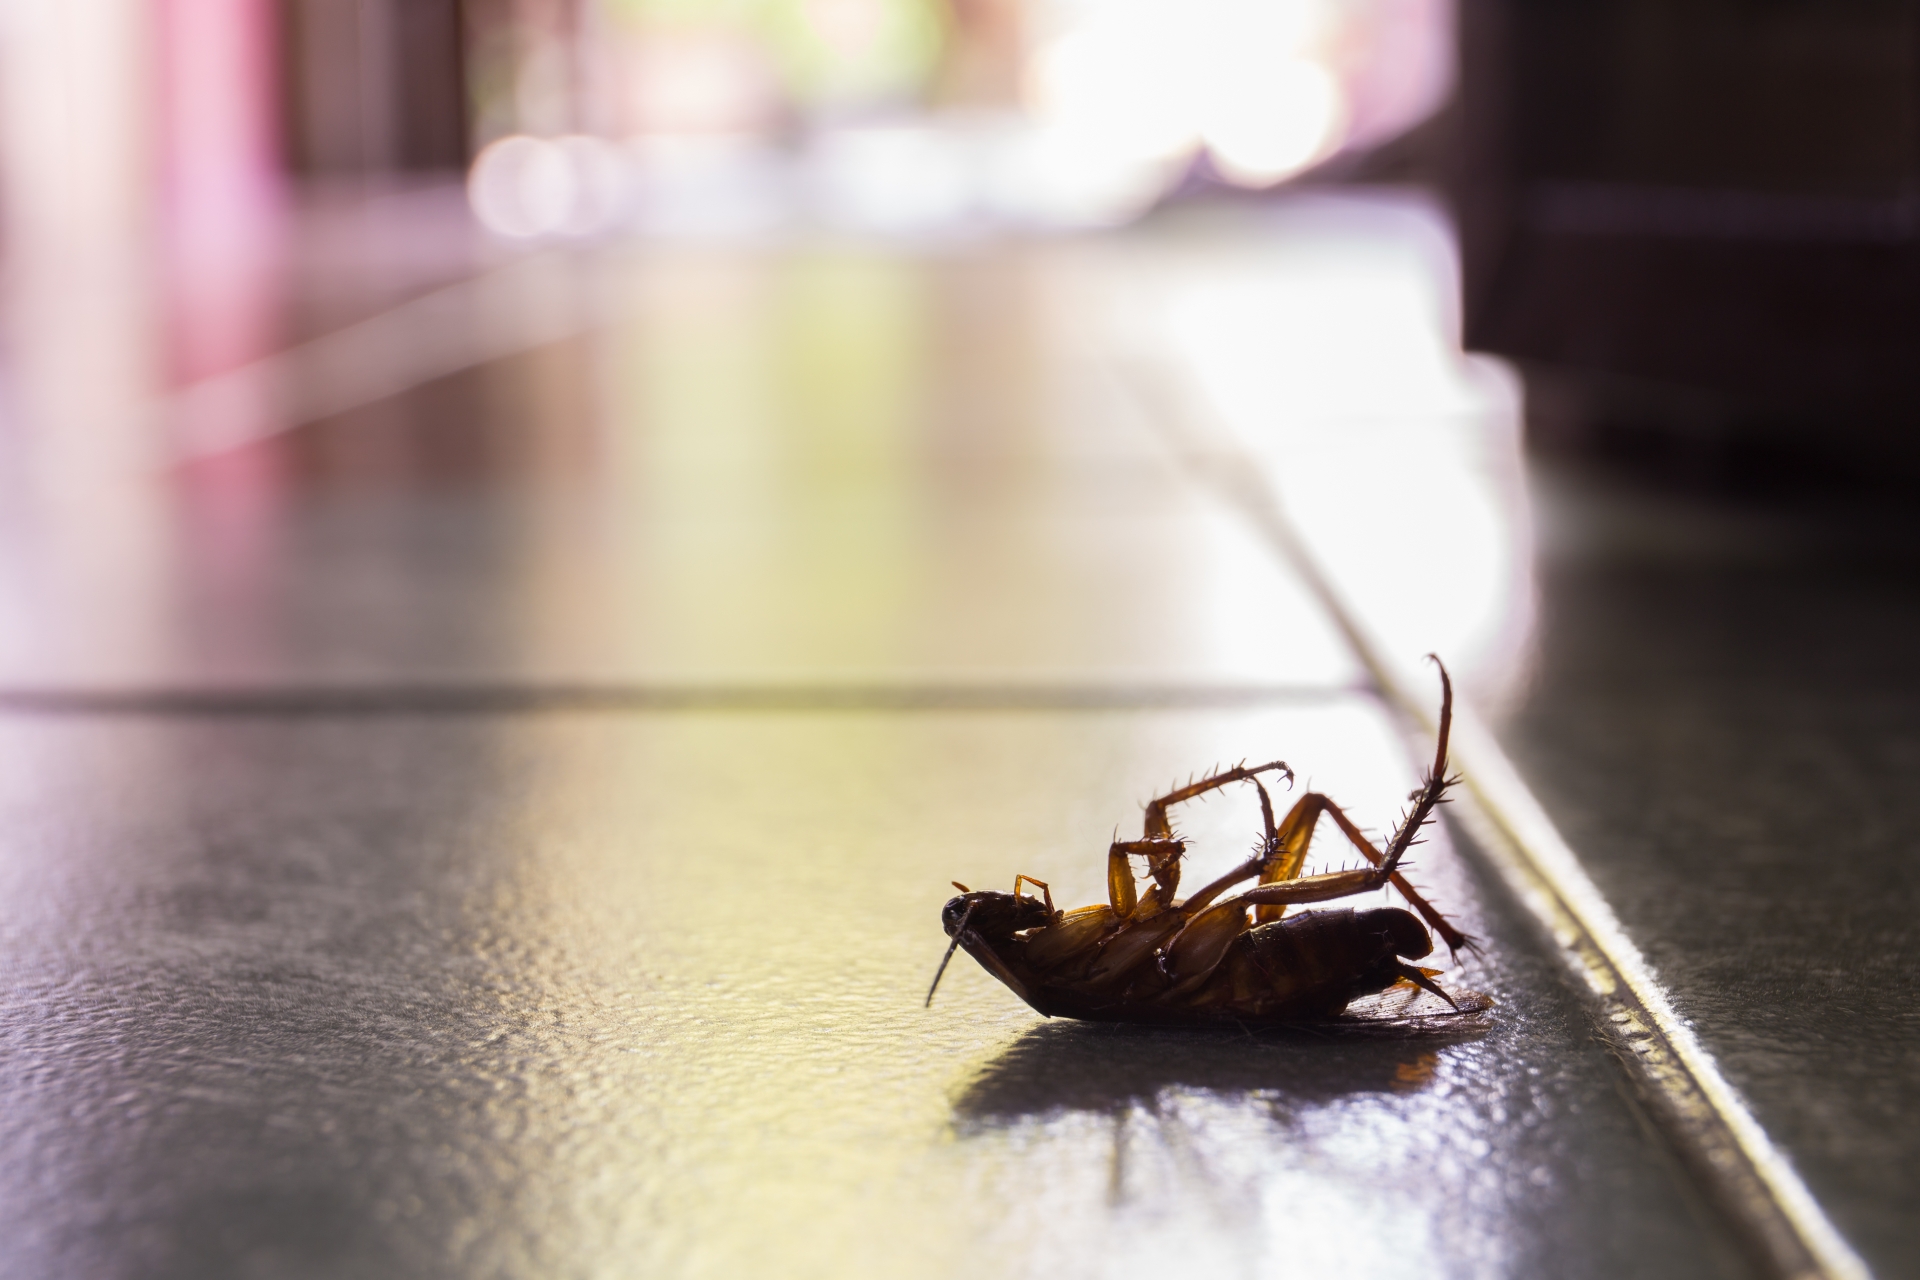 Cockroach Control, Pest Control in Aldgate, Monument, Tower Hill, EC3. Call Now 020 8166 9746